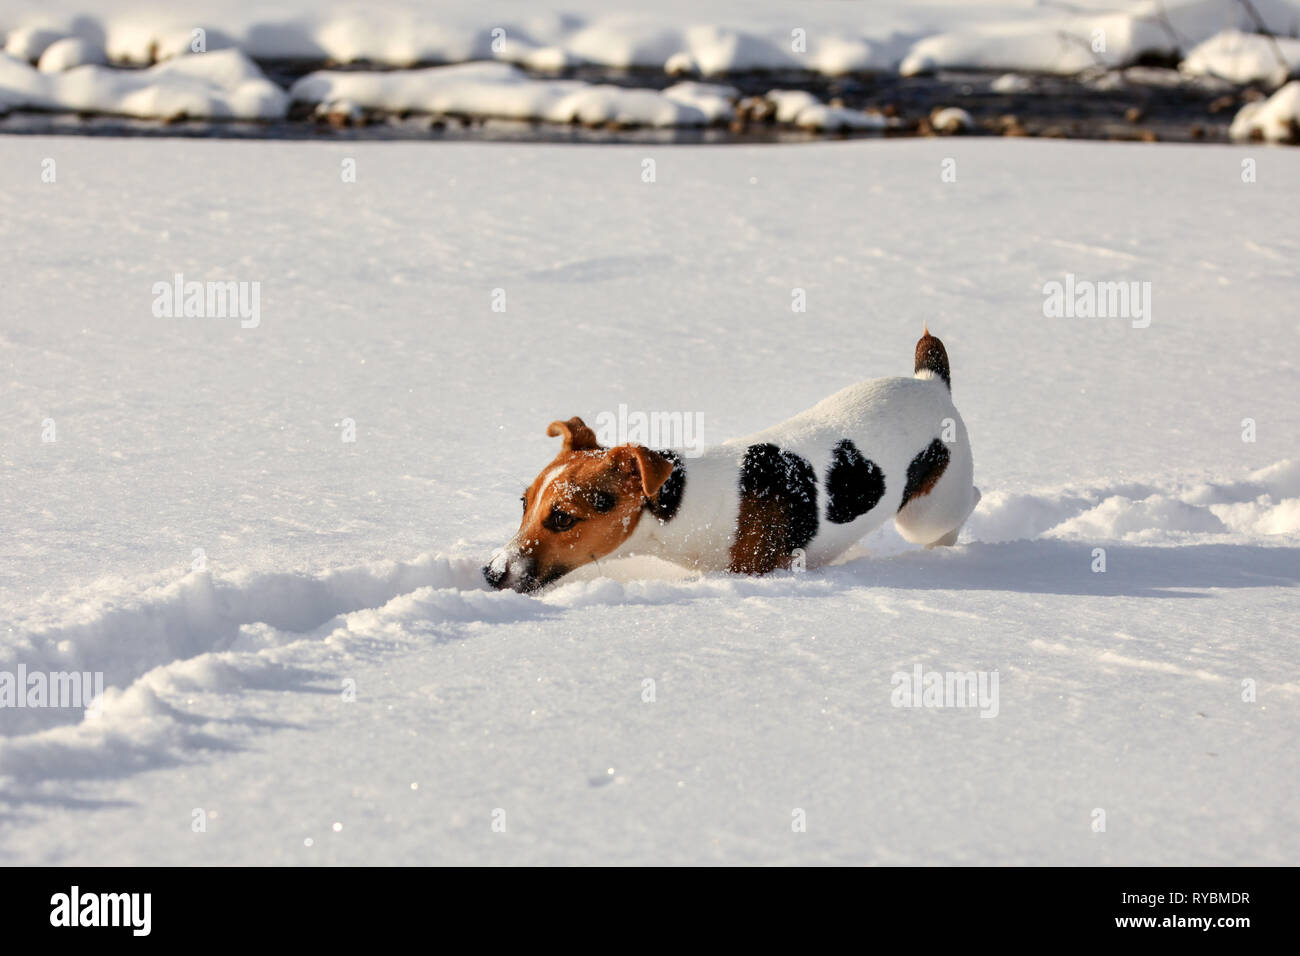 Small Jack Russell terrier dog wading in deep snow, ice crystals o her nose Stock Photo